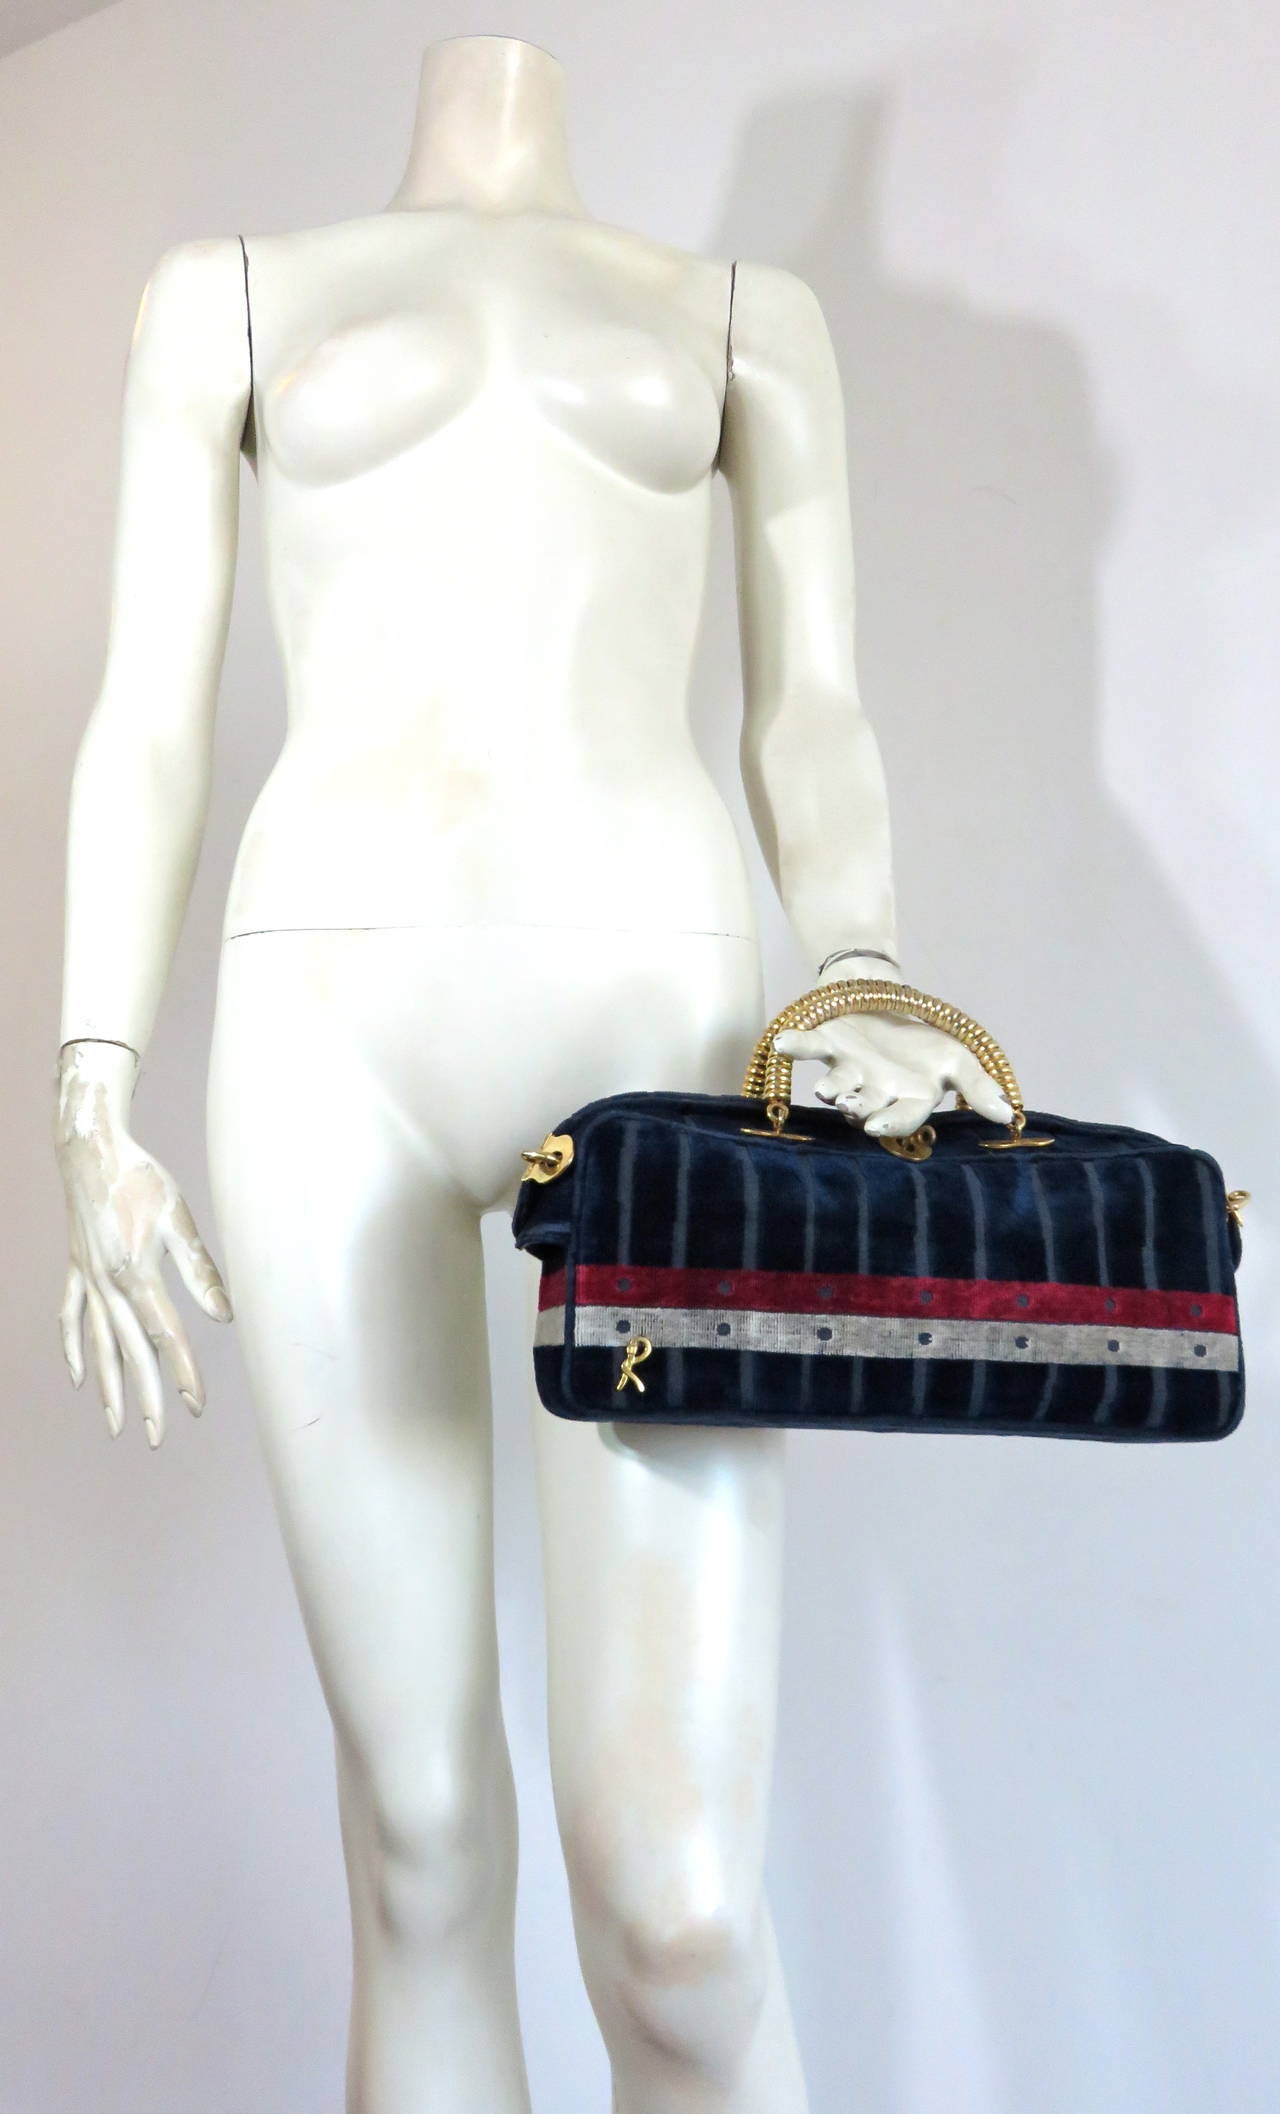 Adorable, 1960's ROBERTA DI CAMERINO Cut velvet long box handbag.

This great handbag features striped, dark midnight-blue, cut velvet base cloth with red and white, dotted stripe border.

Magnificent, golden-brass, metal coil top handles with